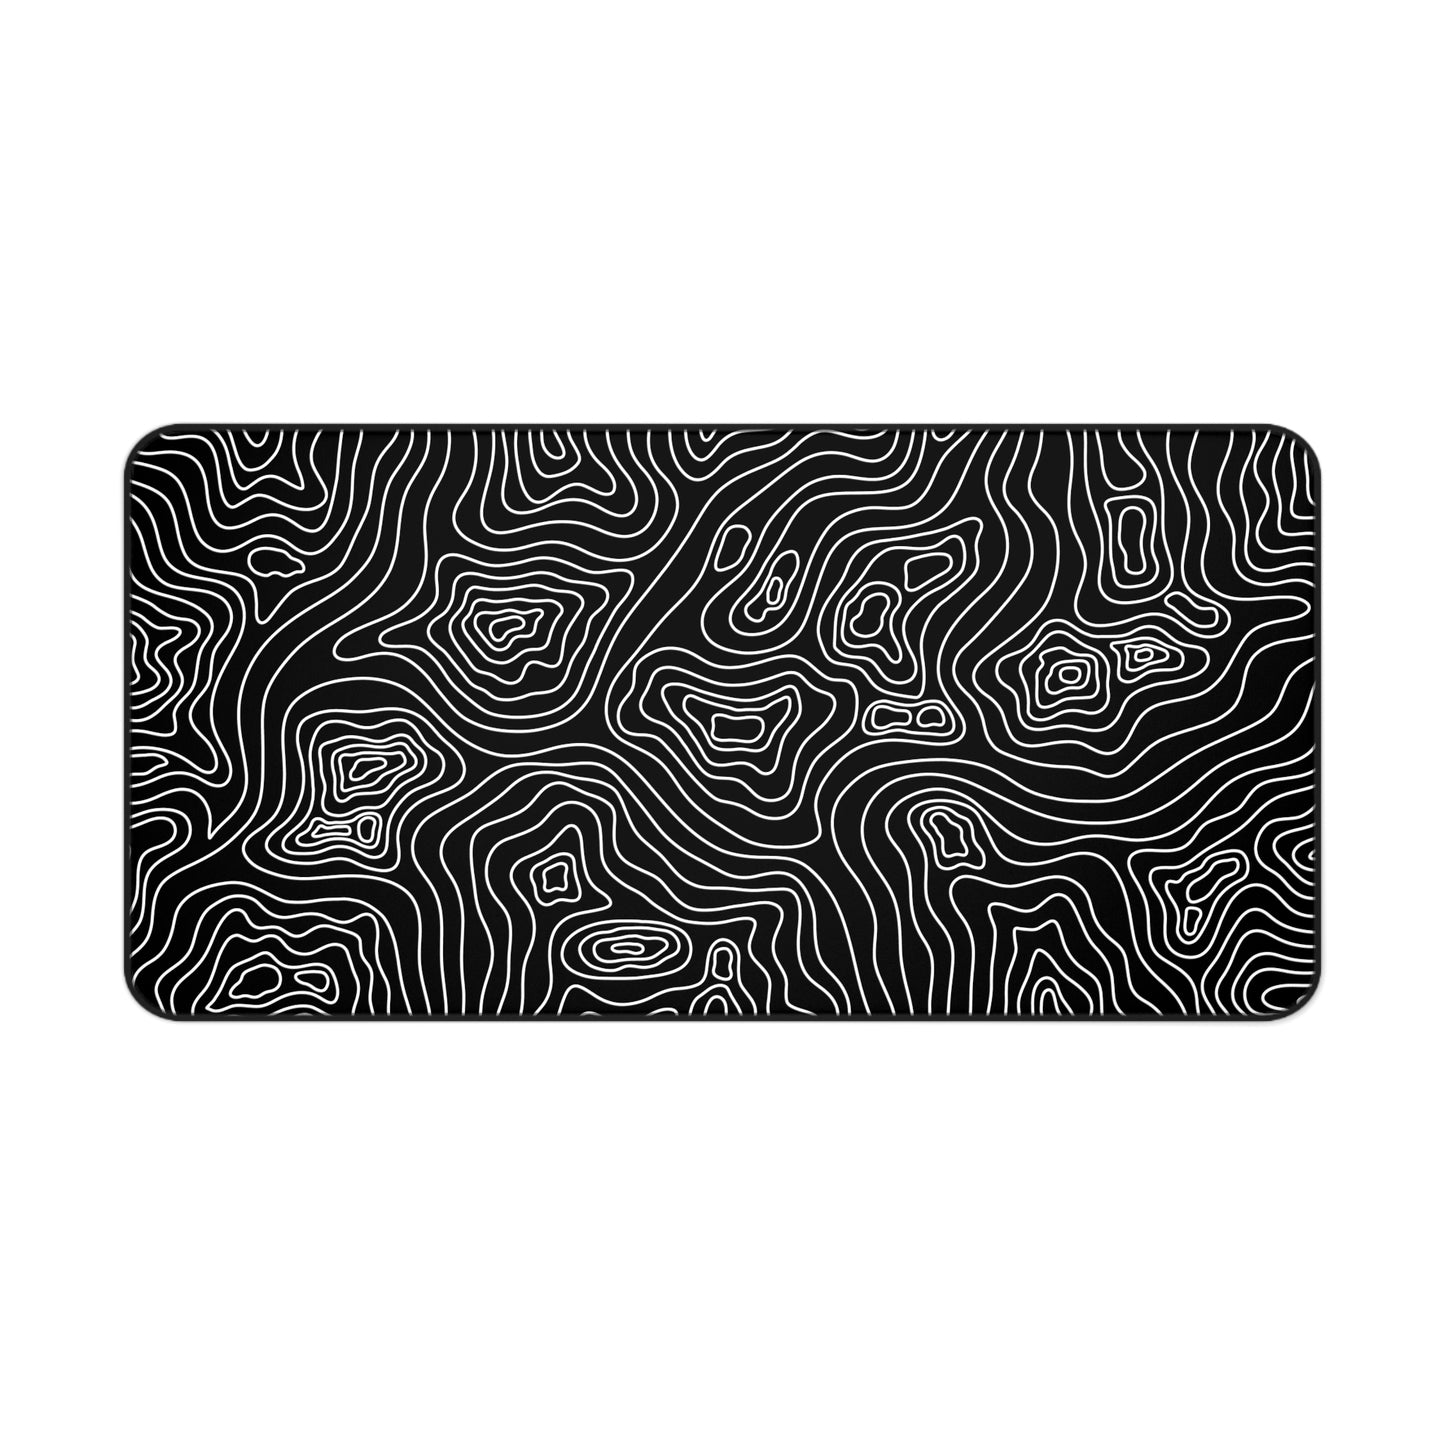 A 31" x 15.5" black desk mat with white topographic lines.